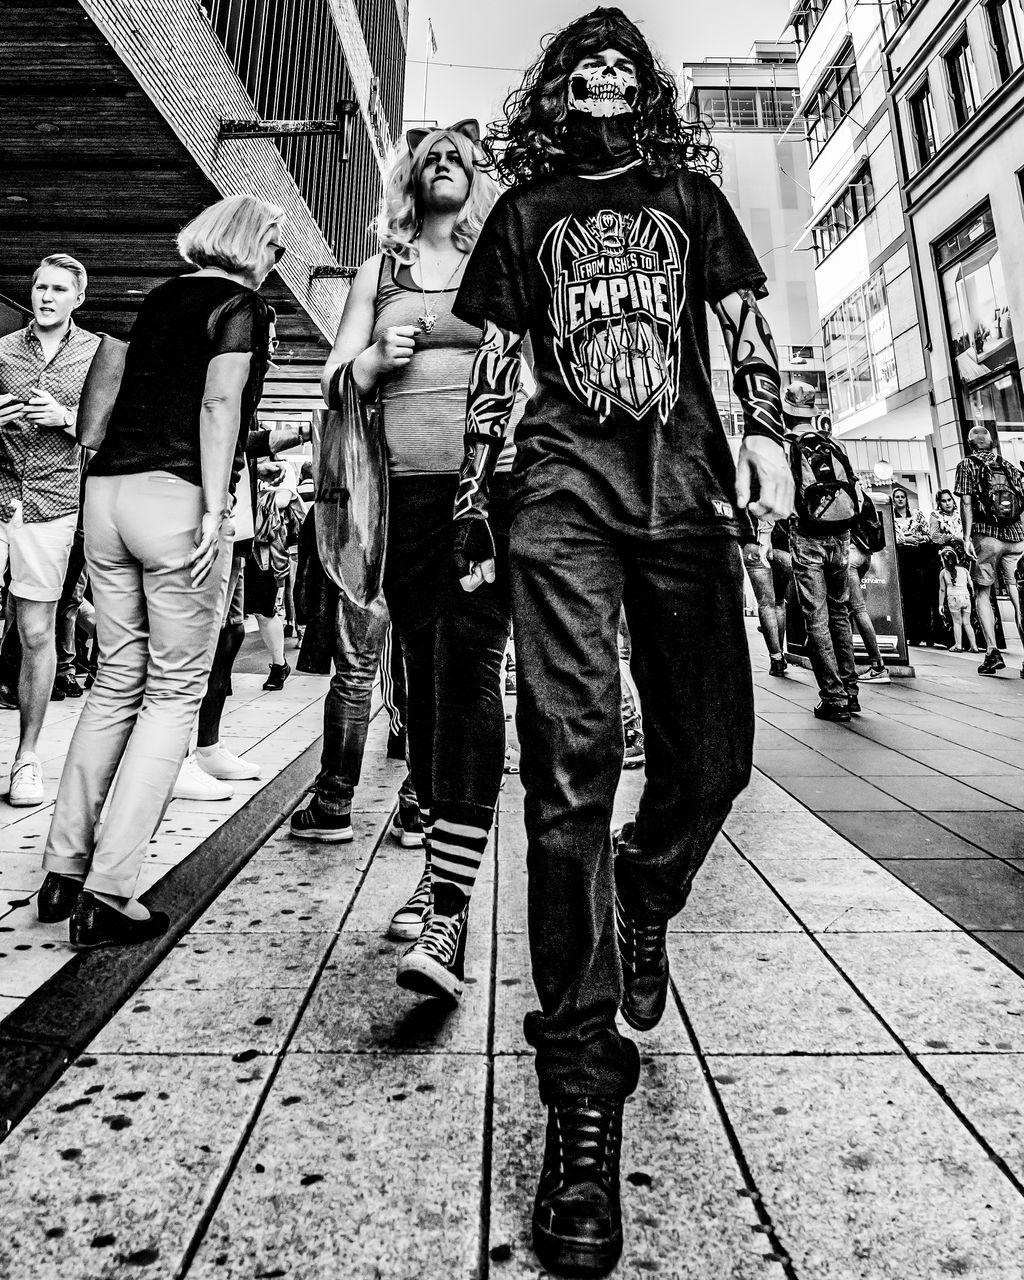 city, group of people, real people, street, architecture, full length, walking, building exterior, people, day, standing, lifestyles, men, women, built structure, clothing, adult, leisure activity, city life, footpath, outdoors